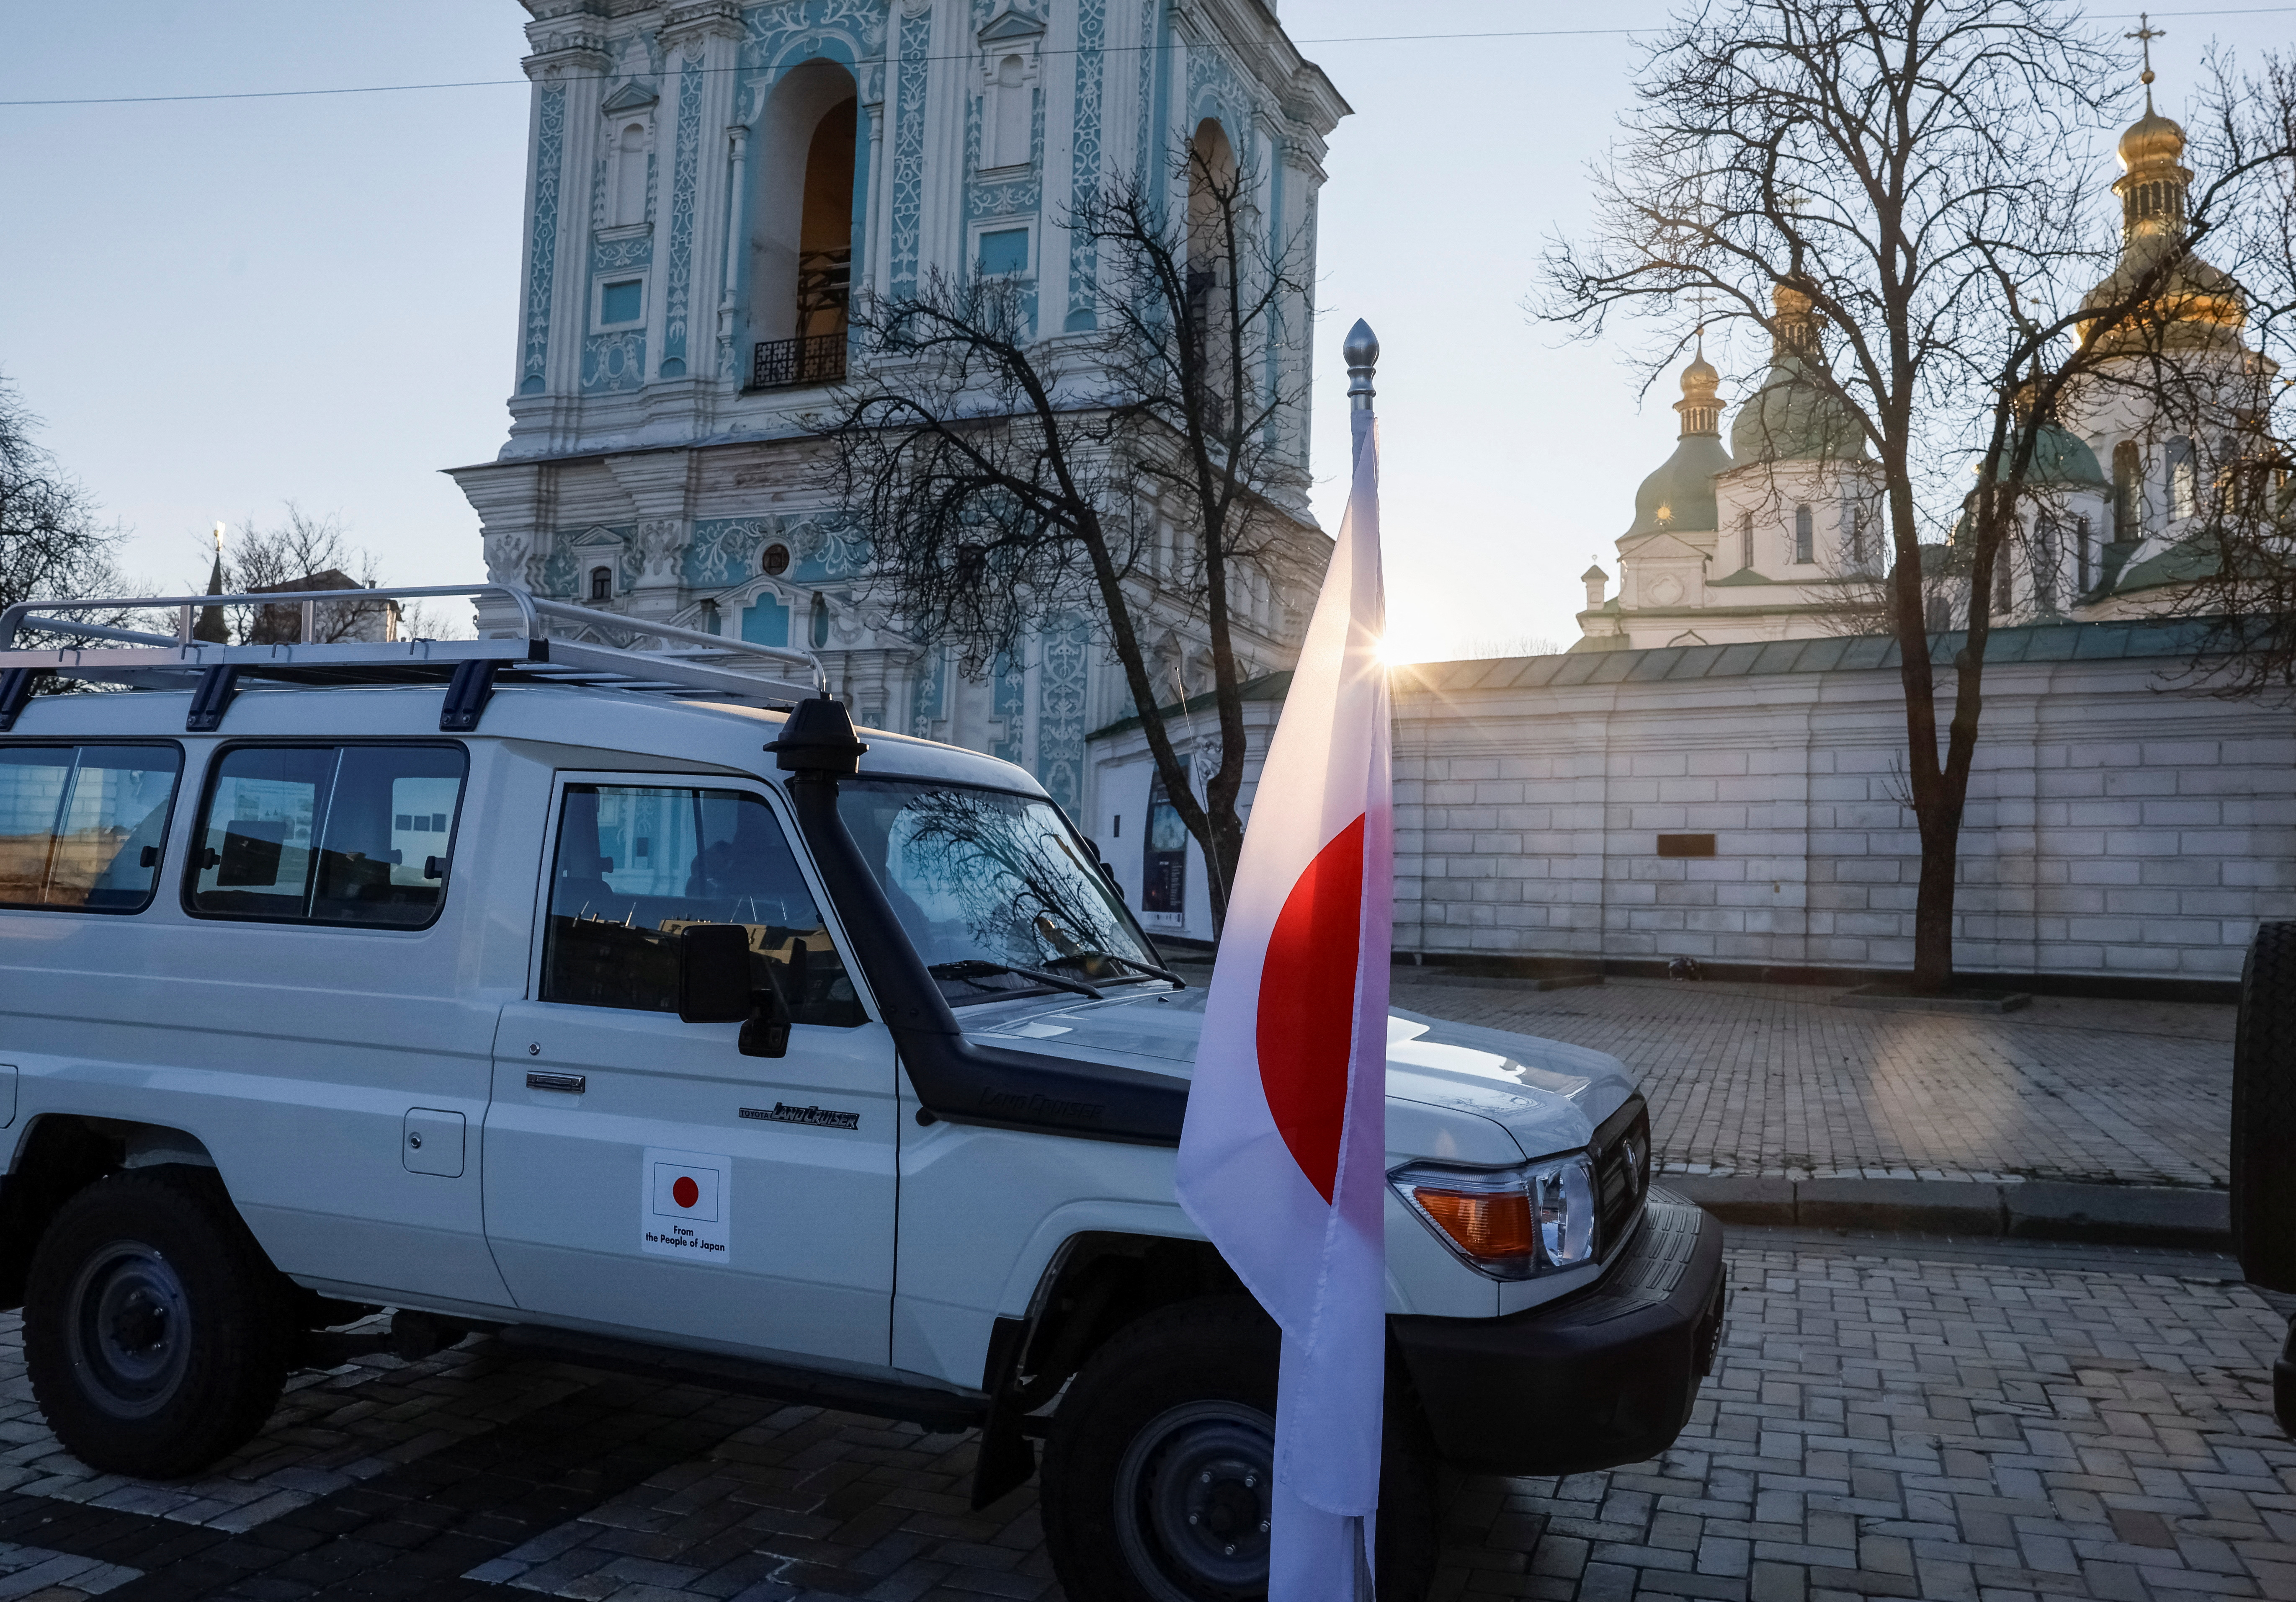 A transfer ceremony of special vehicles from Japan to Ukraine in Kyiv